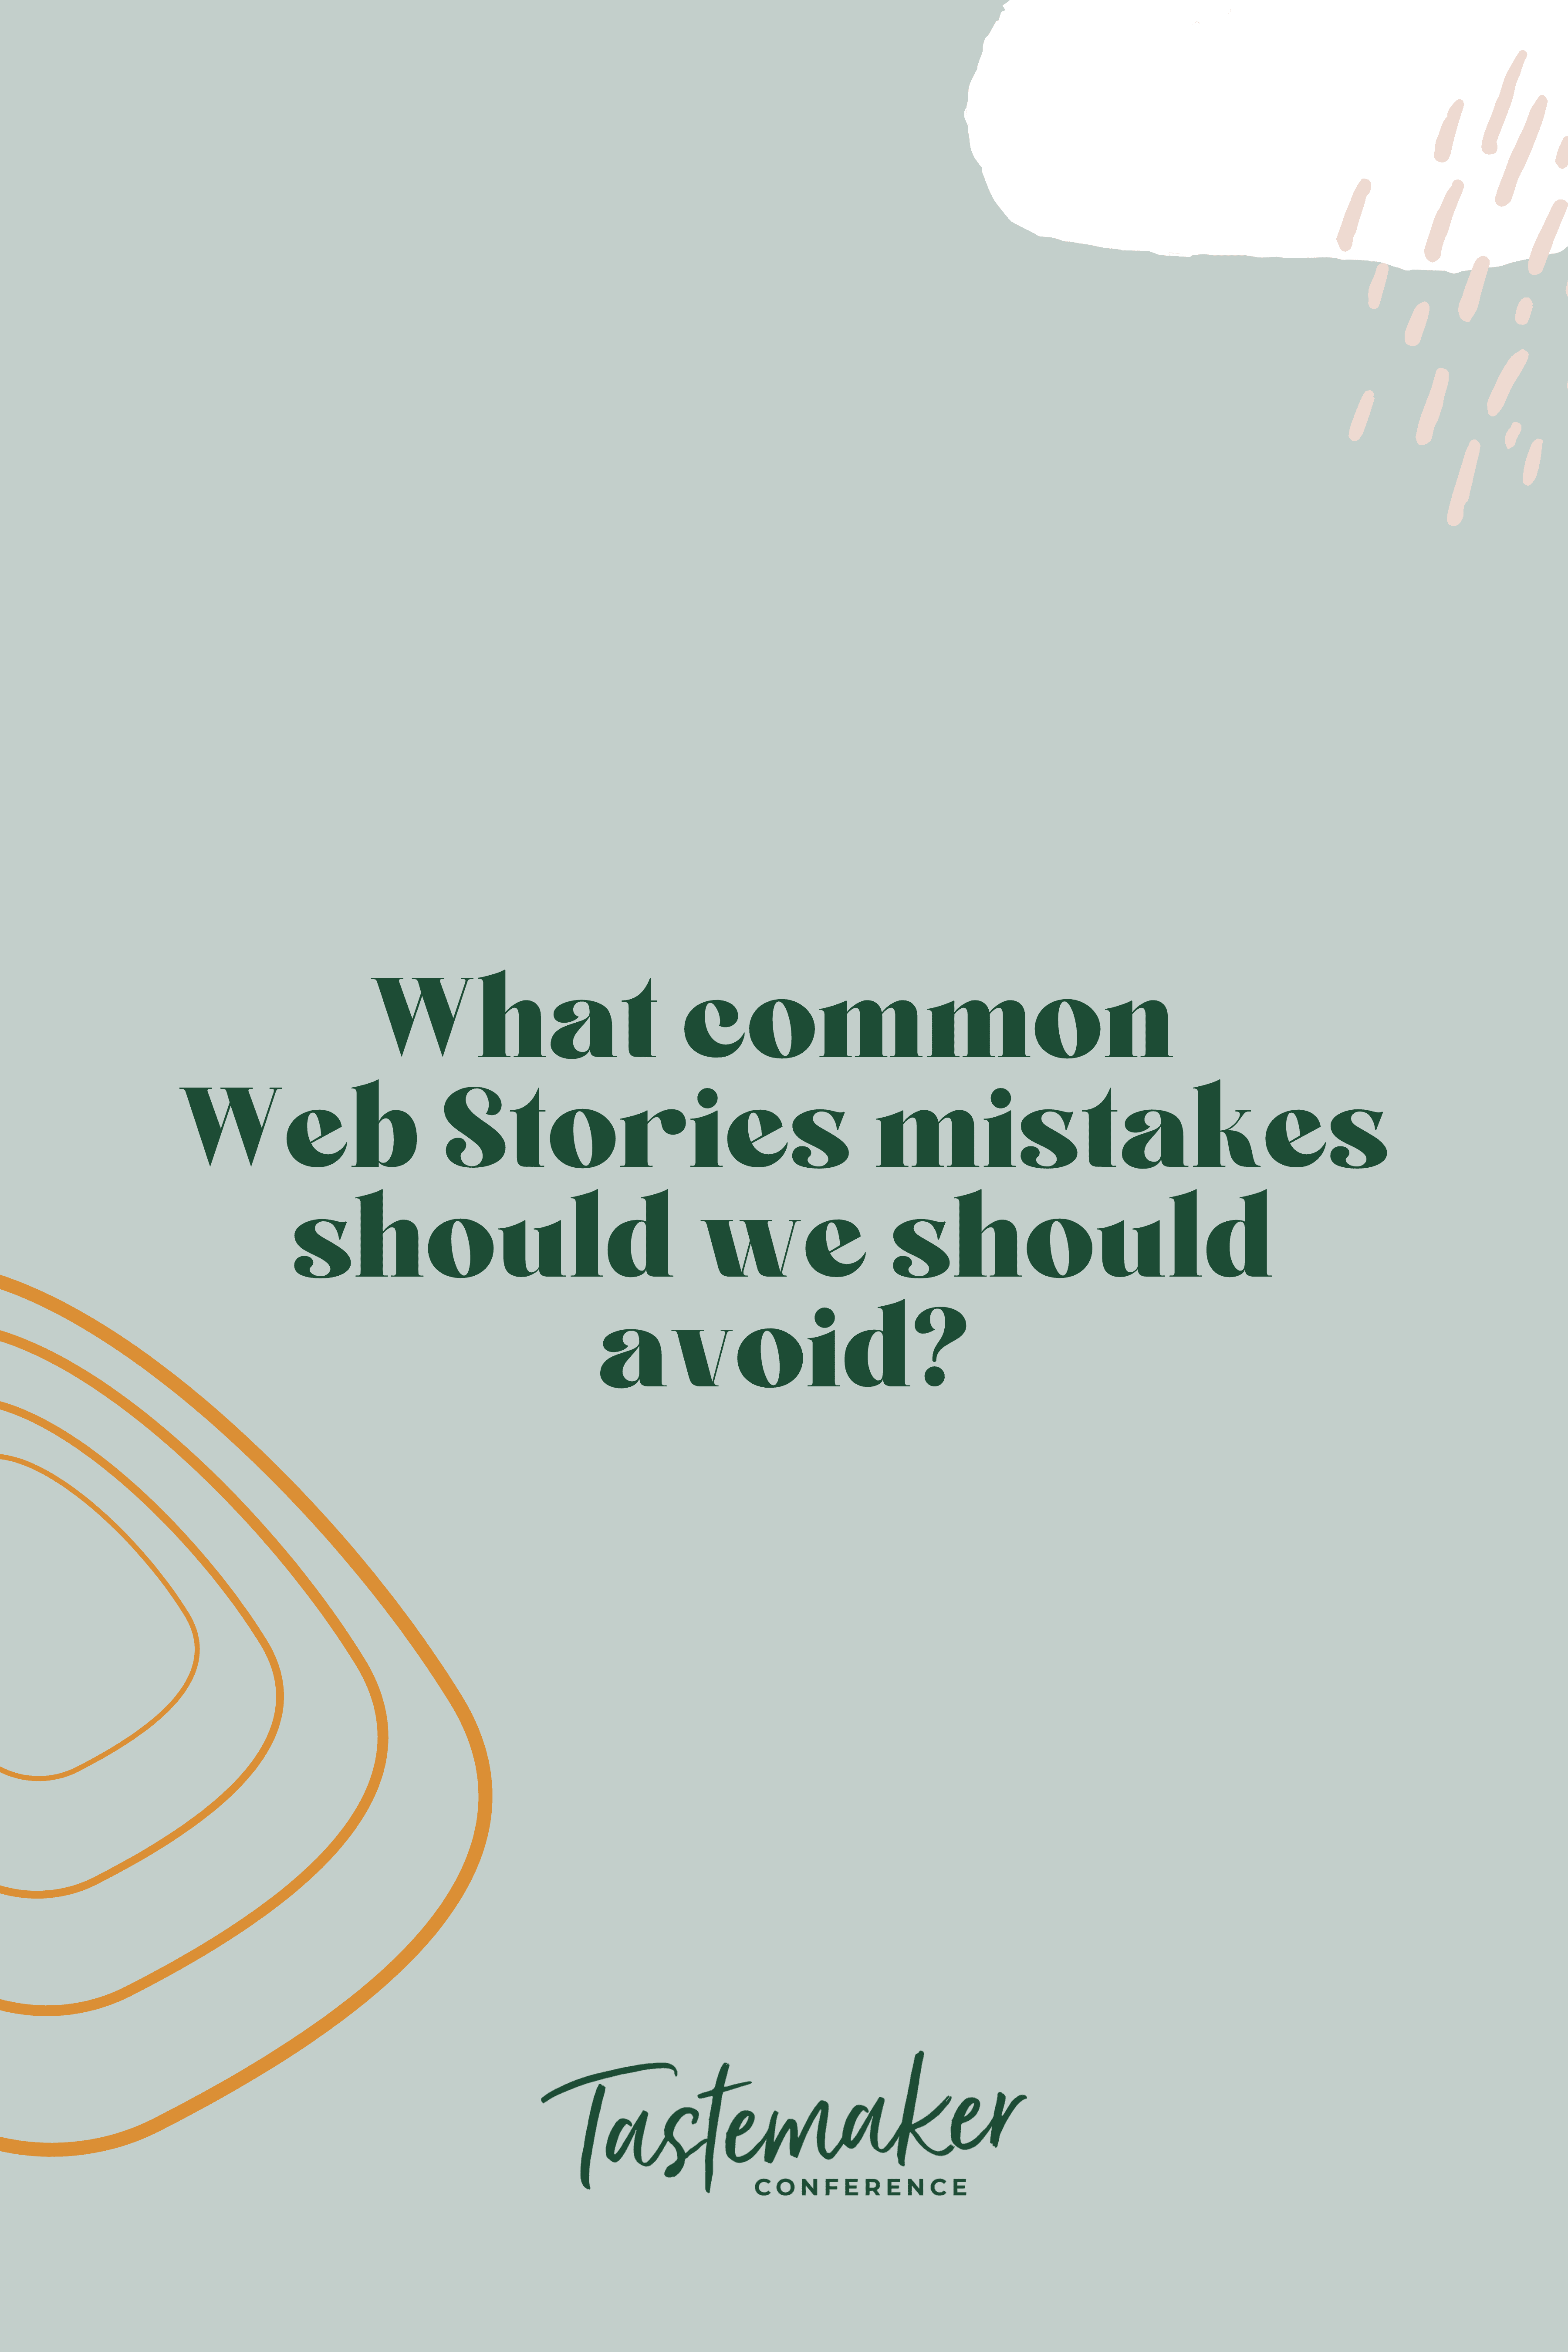 graphic reading: What common Web Stories mistakes should we should avoid?